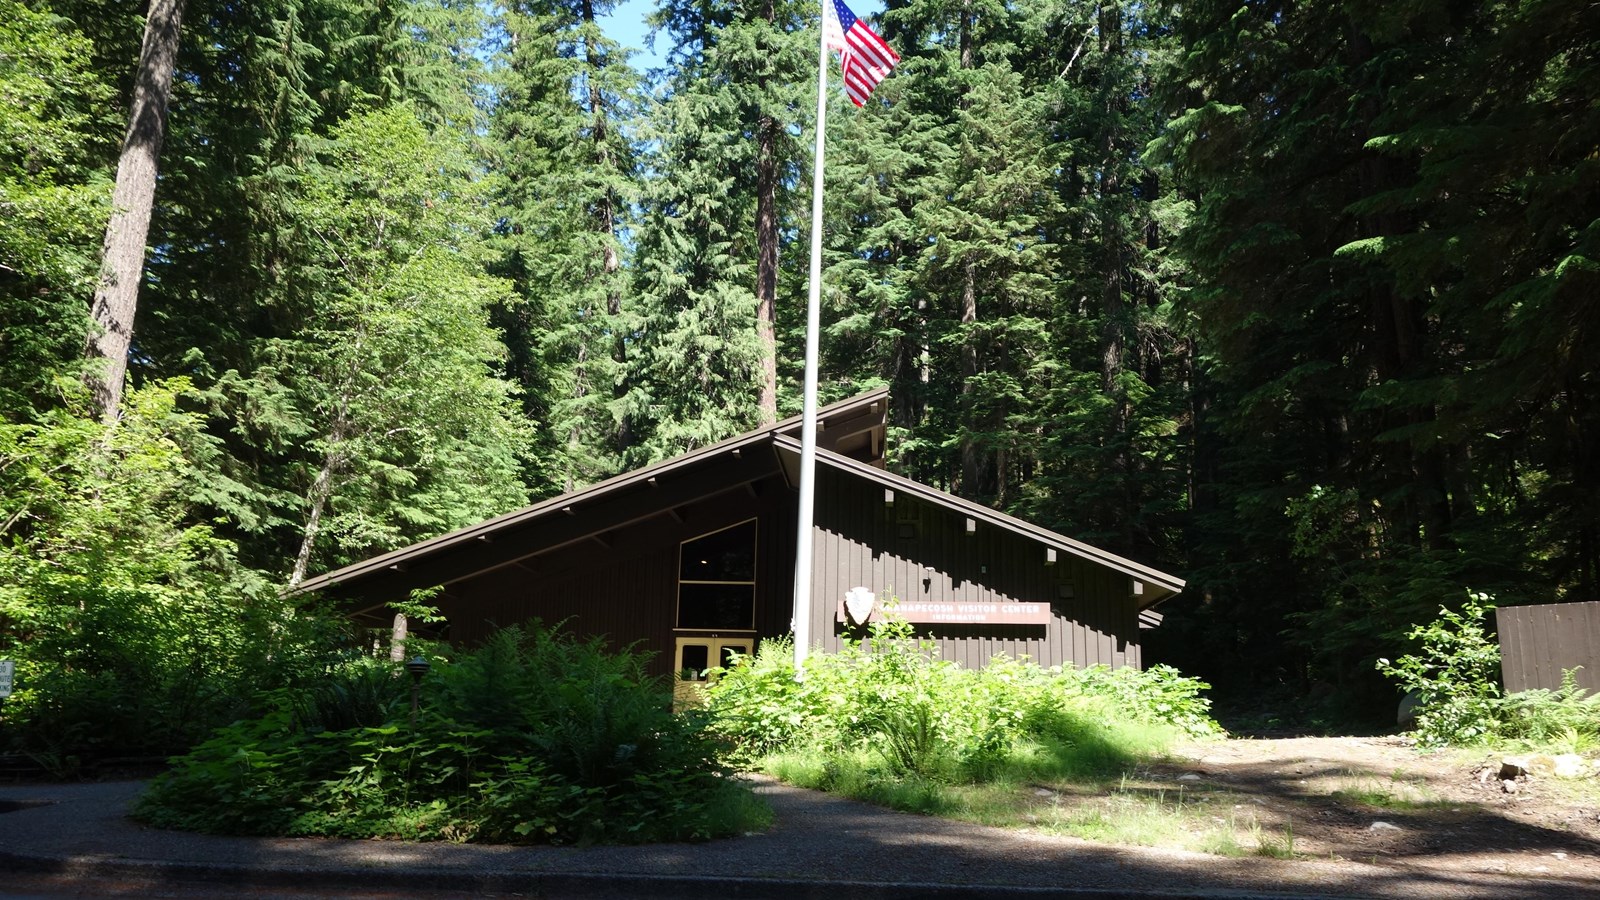 A brown and tan building with a pitched roof sits on the edge of an old-growth forest.